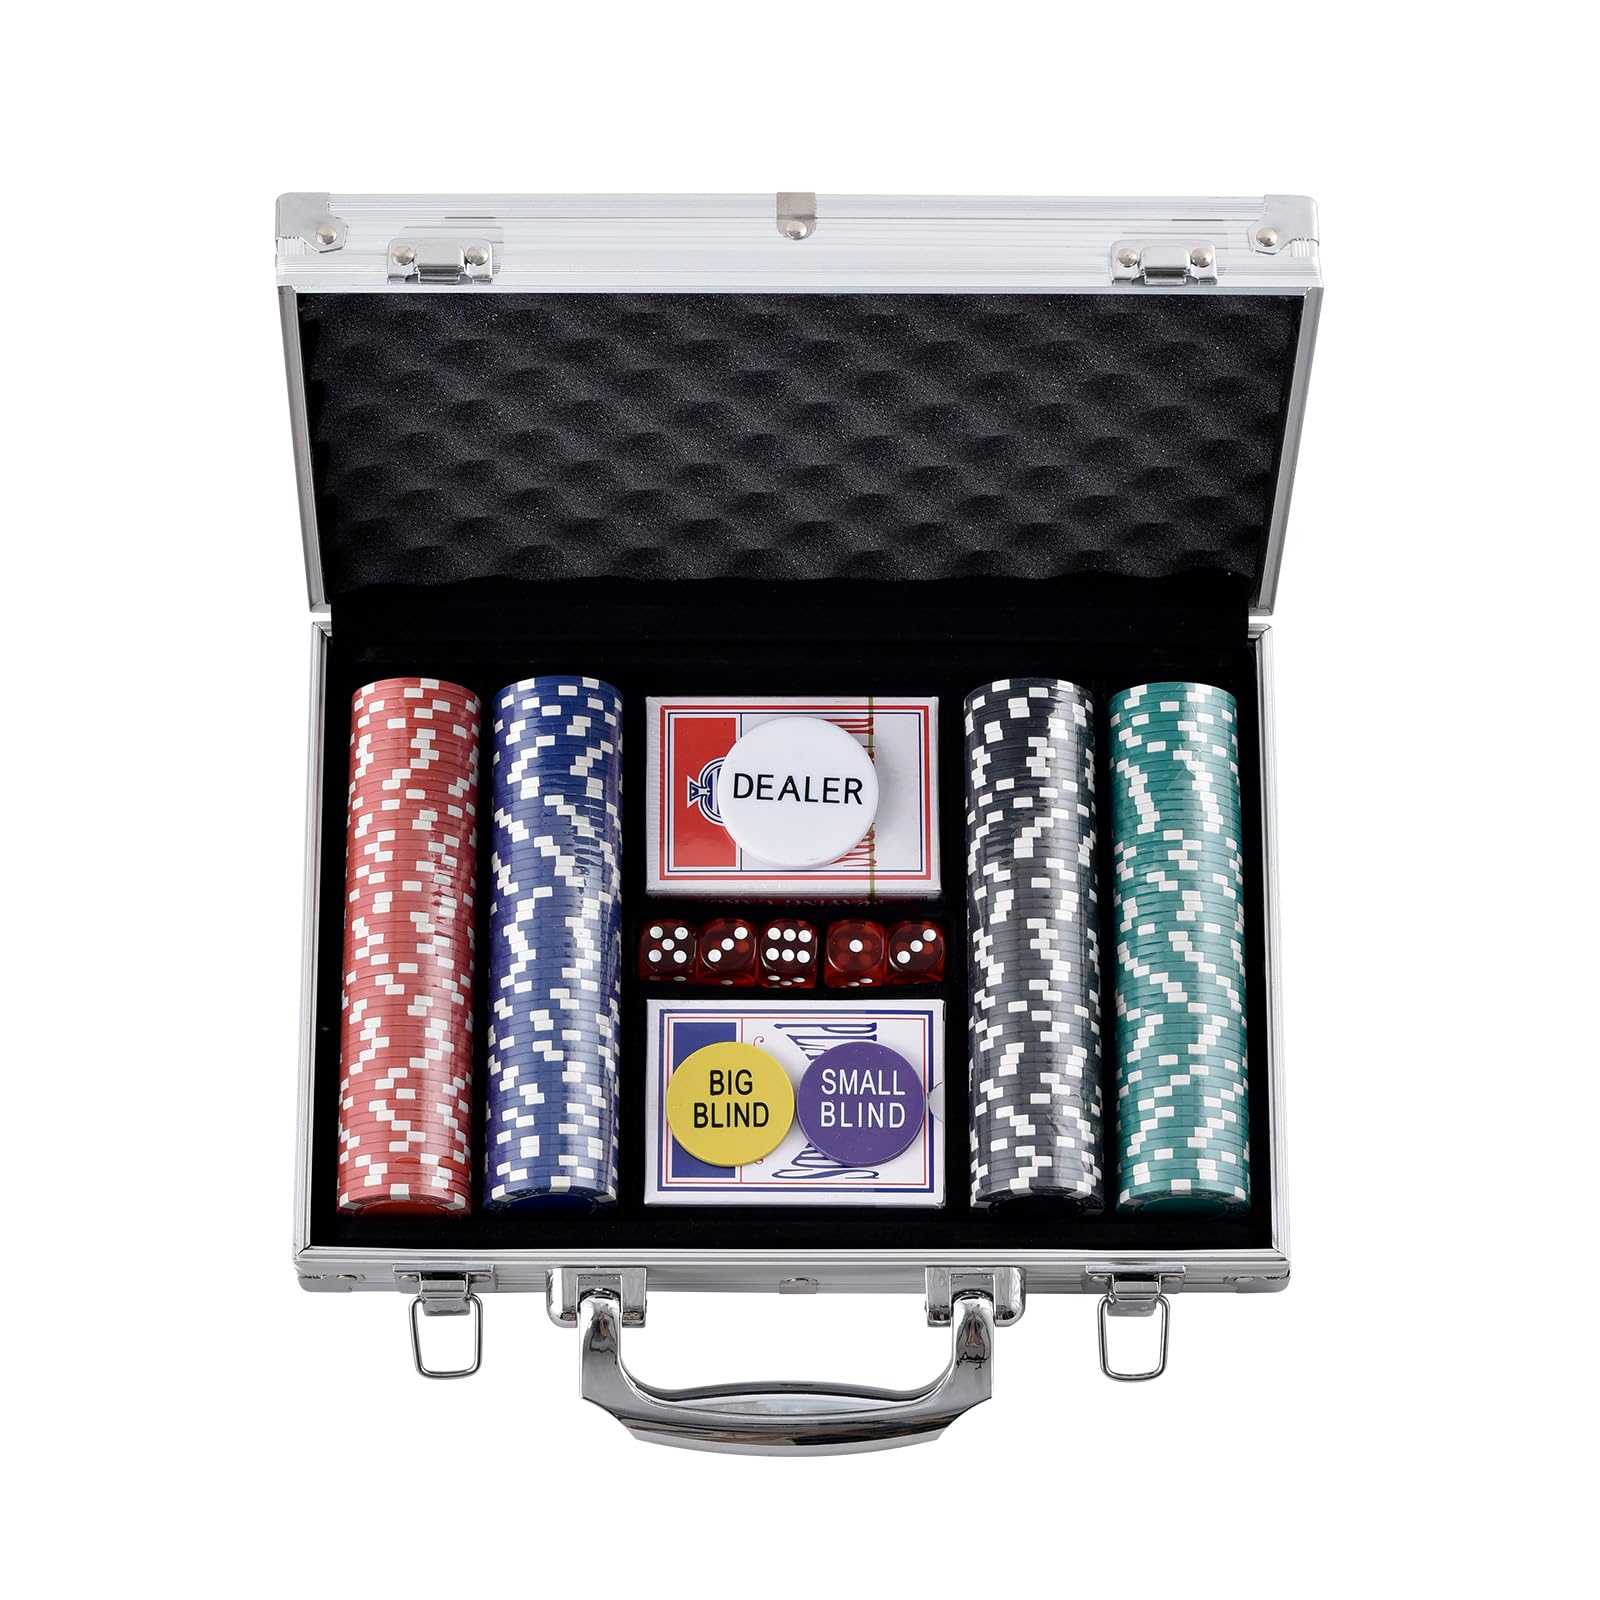 VEVOR Poker Chip Set, 200-Piece Poker Set, Complete Poker Playing Game Set with Aluminum Carrying Case, 11.5 Gram Casino Chips, Cards, Buttons and Dices, for Texas Hold'em, Blackjack, Gambling